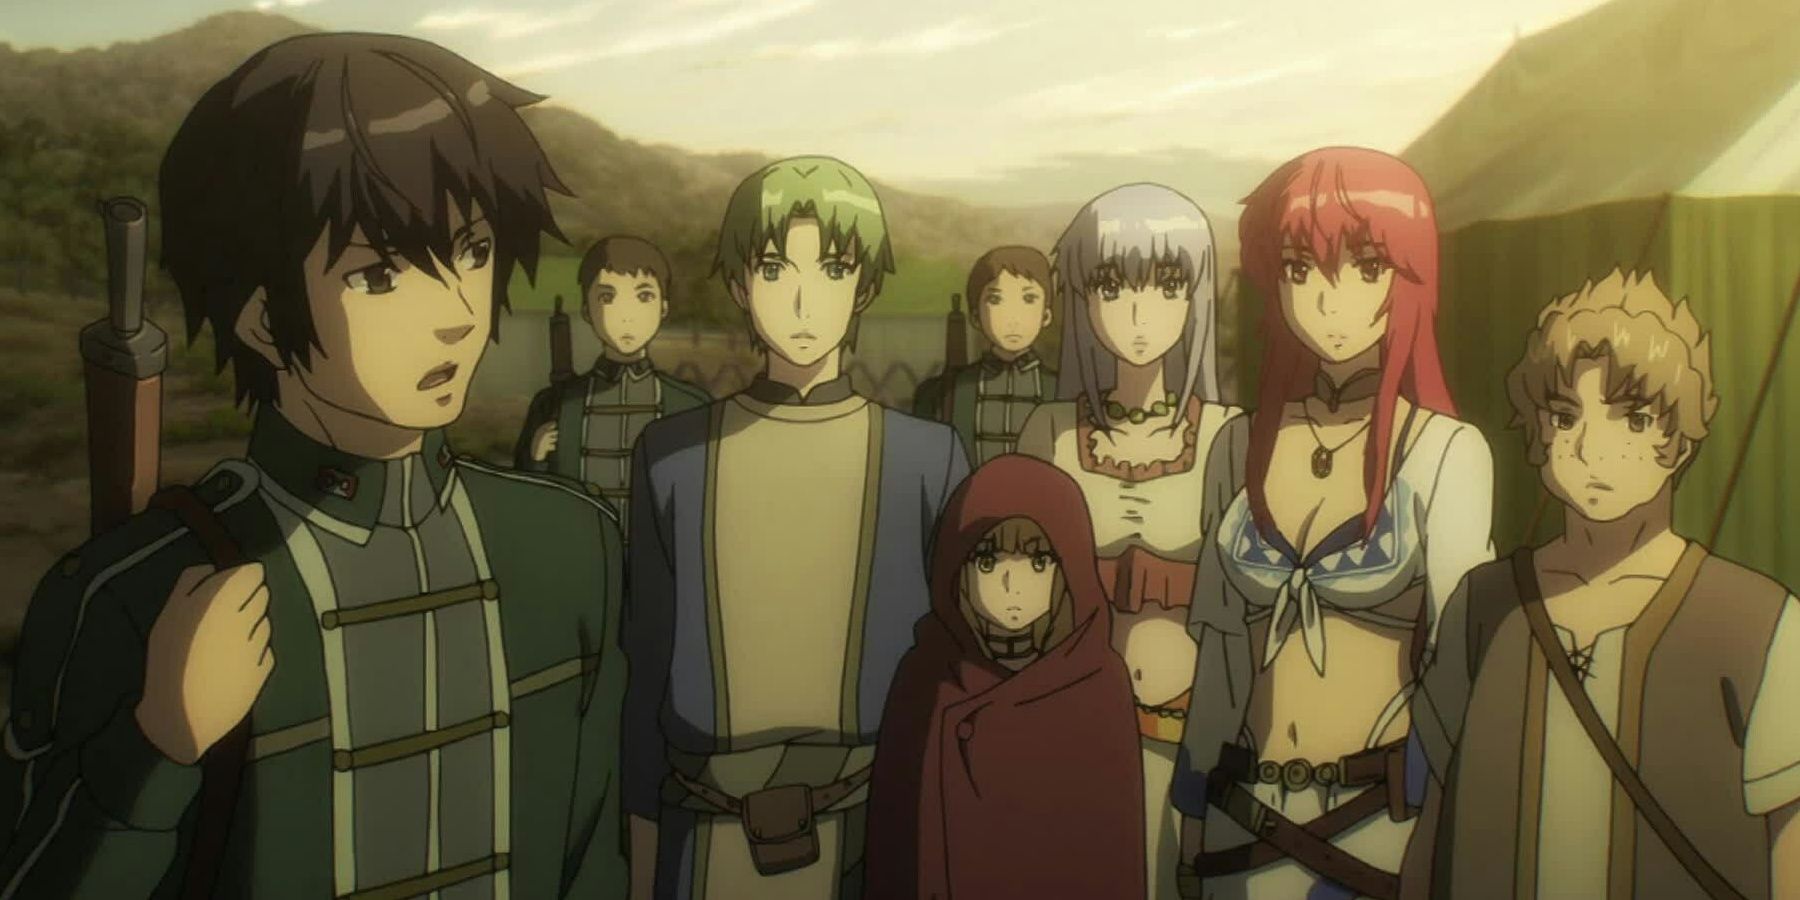 The cast of characters featured in the Alderamin on the Sky anime.